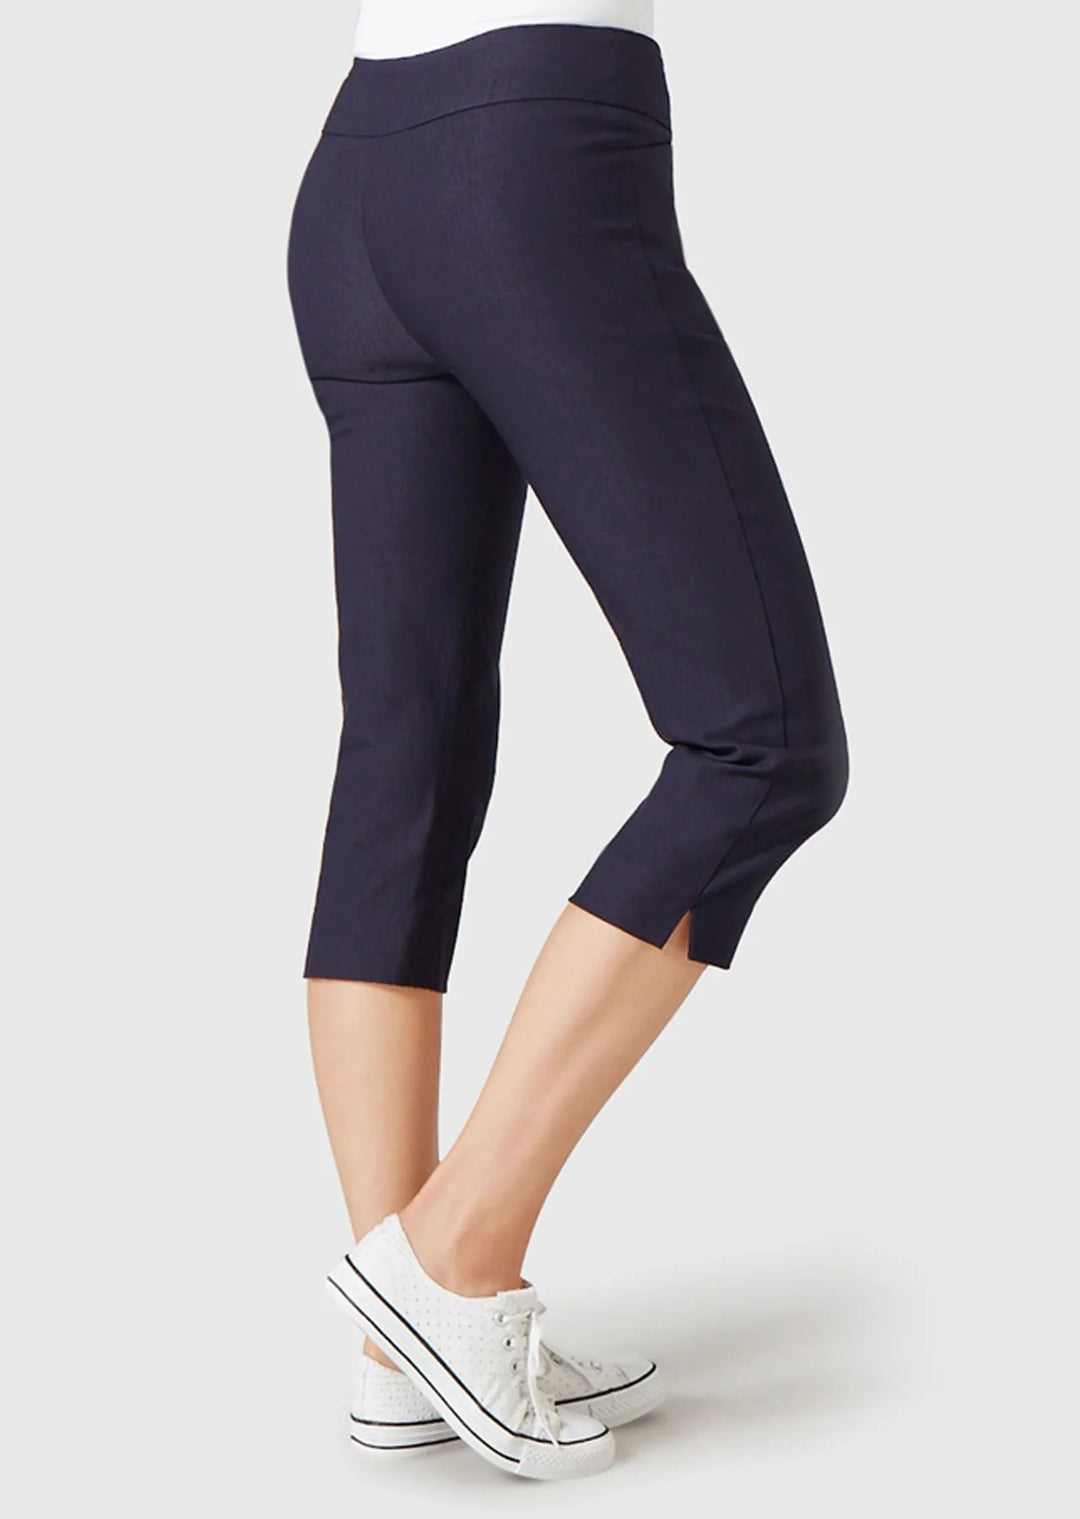 Classic Pull On Capri Pant With Pockets